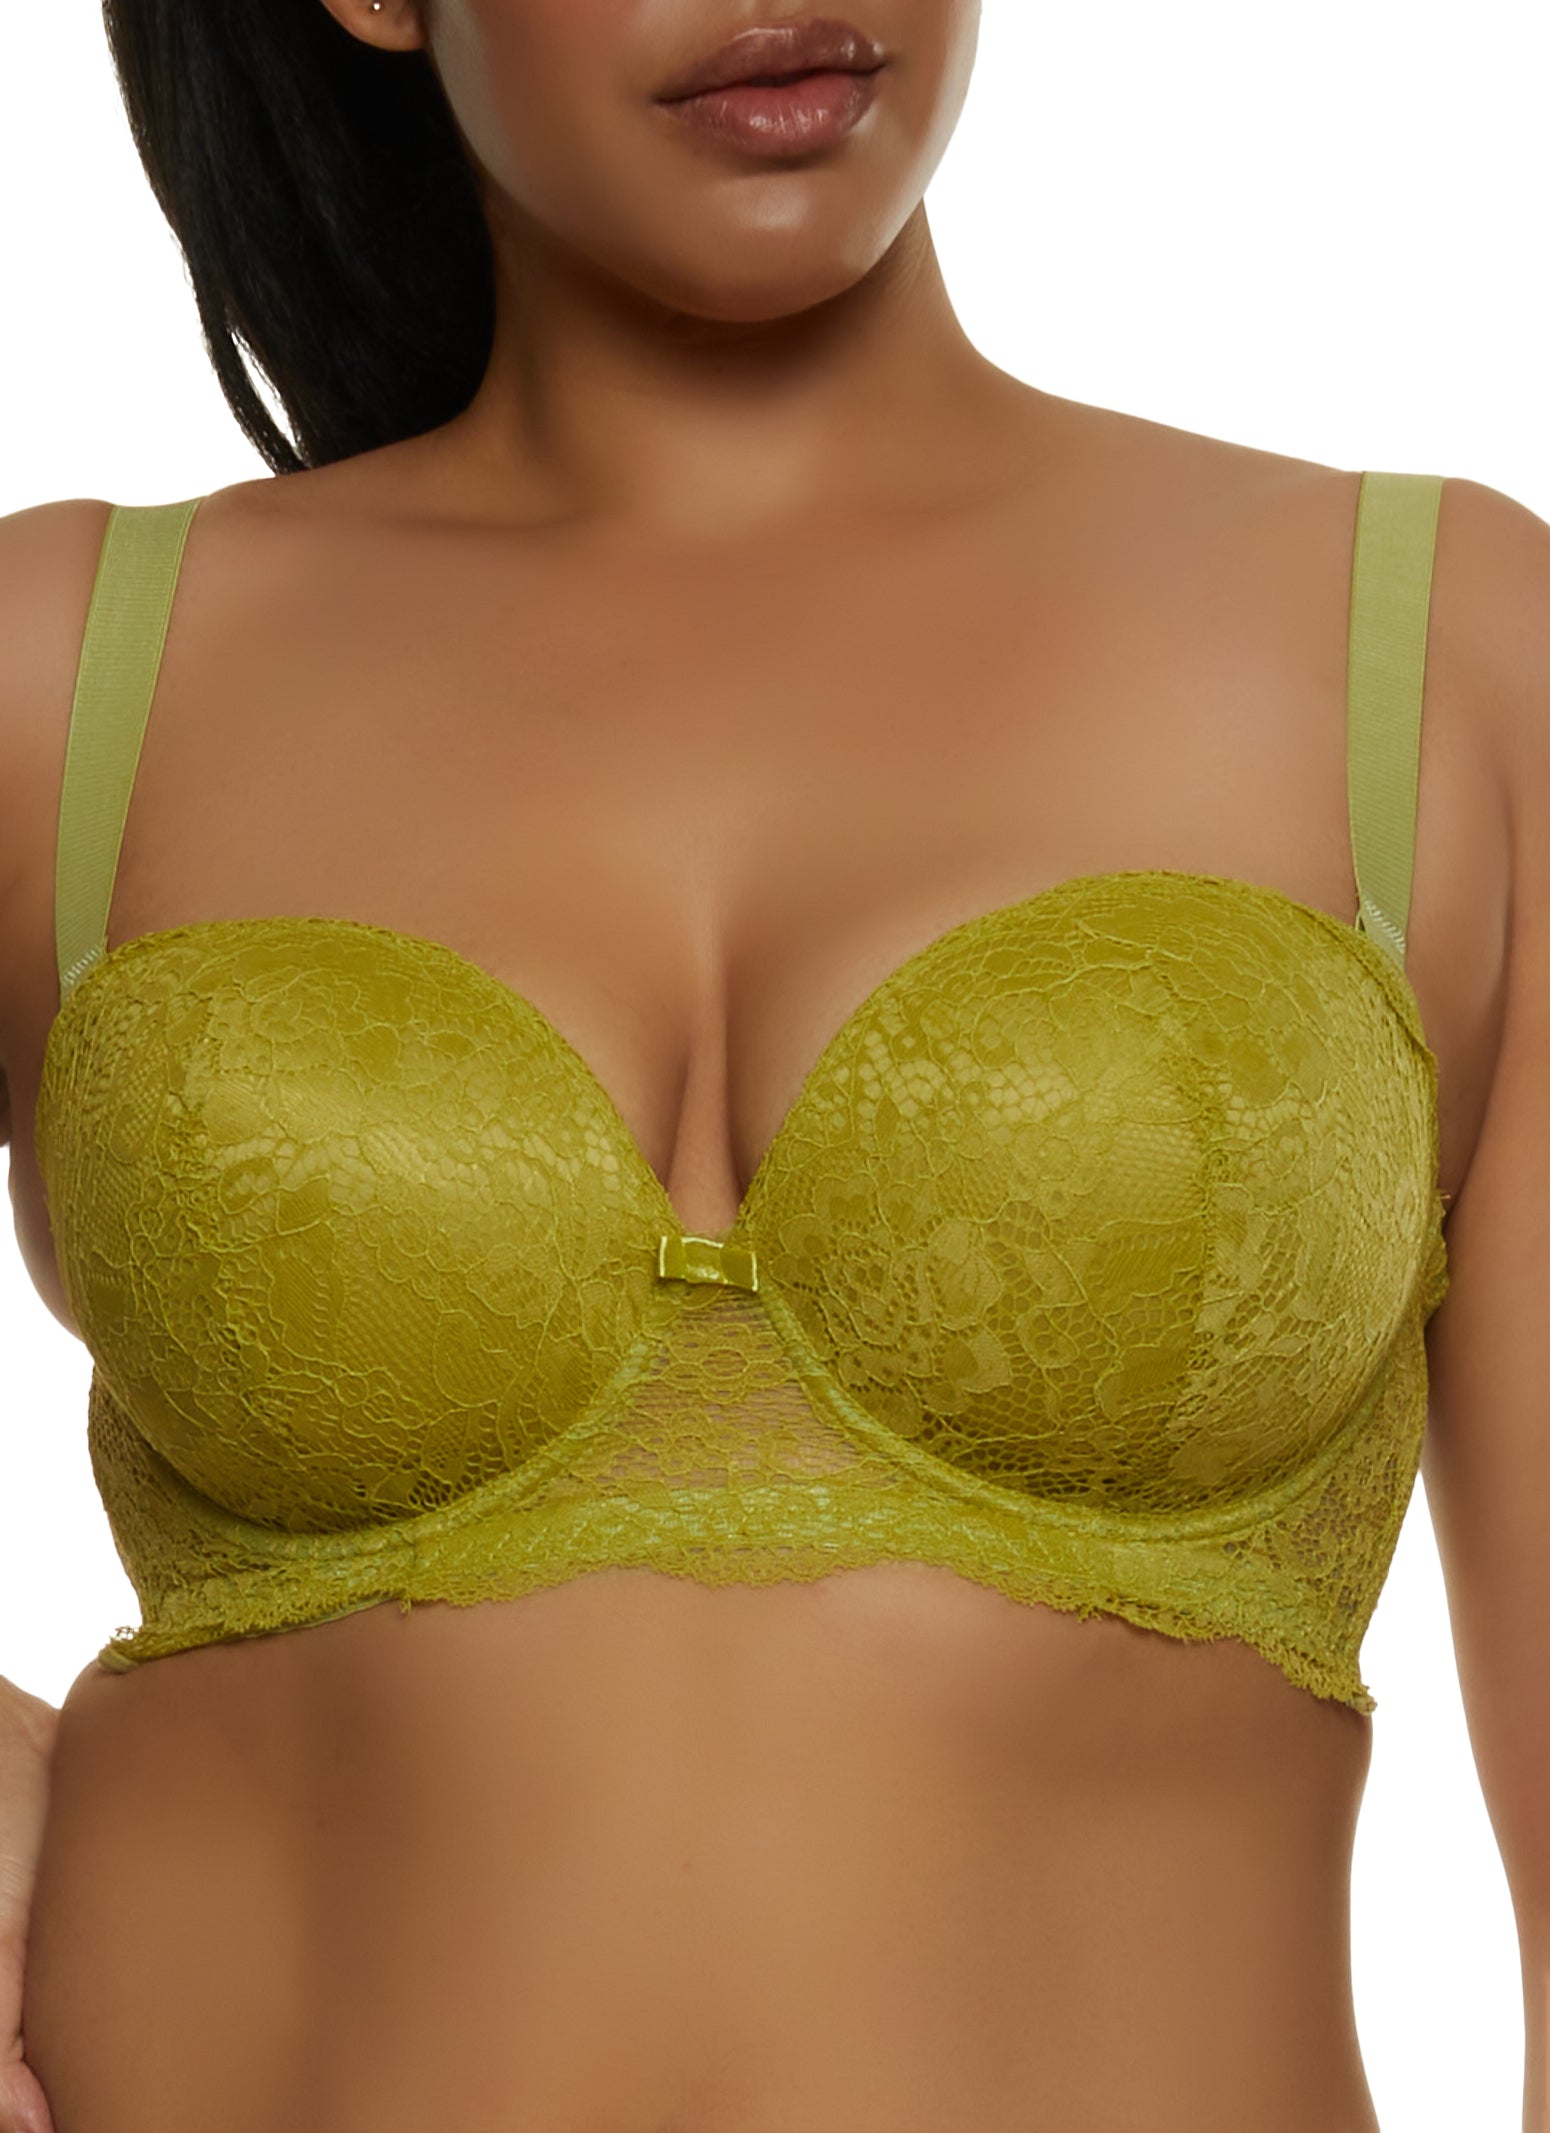 Floral push-up bra with lace Woman, Green